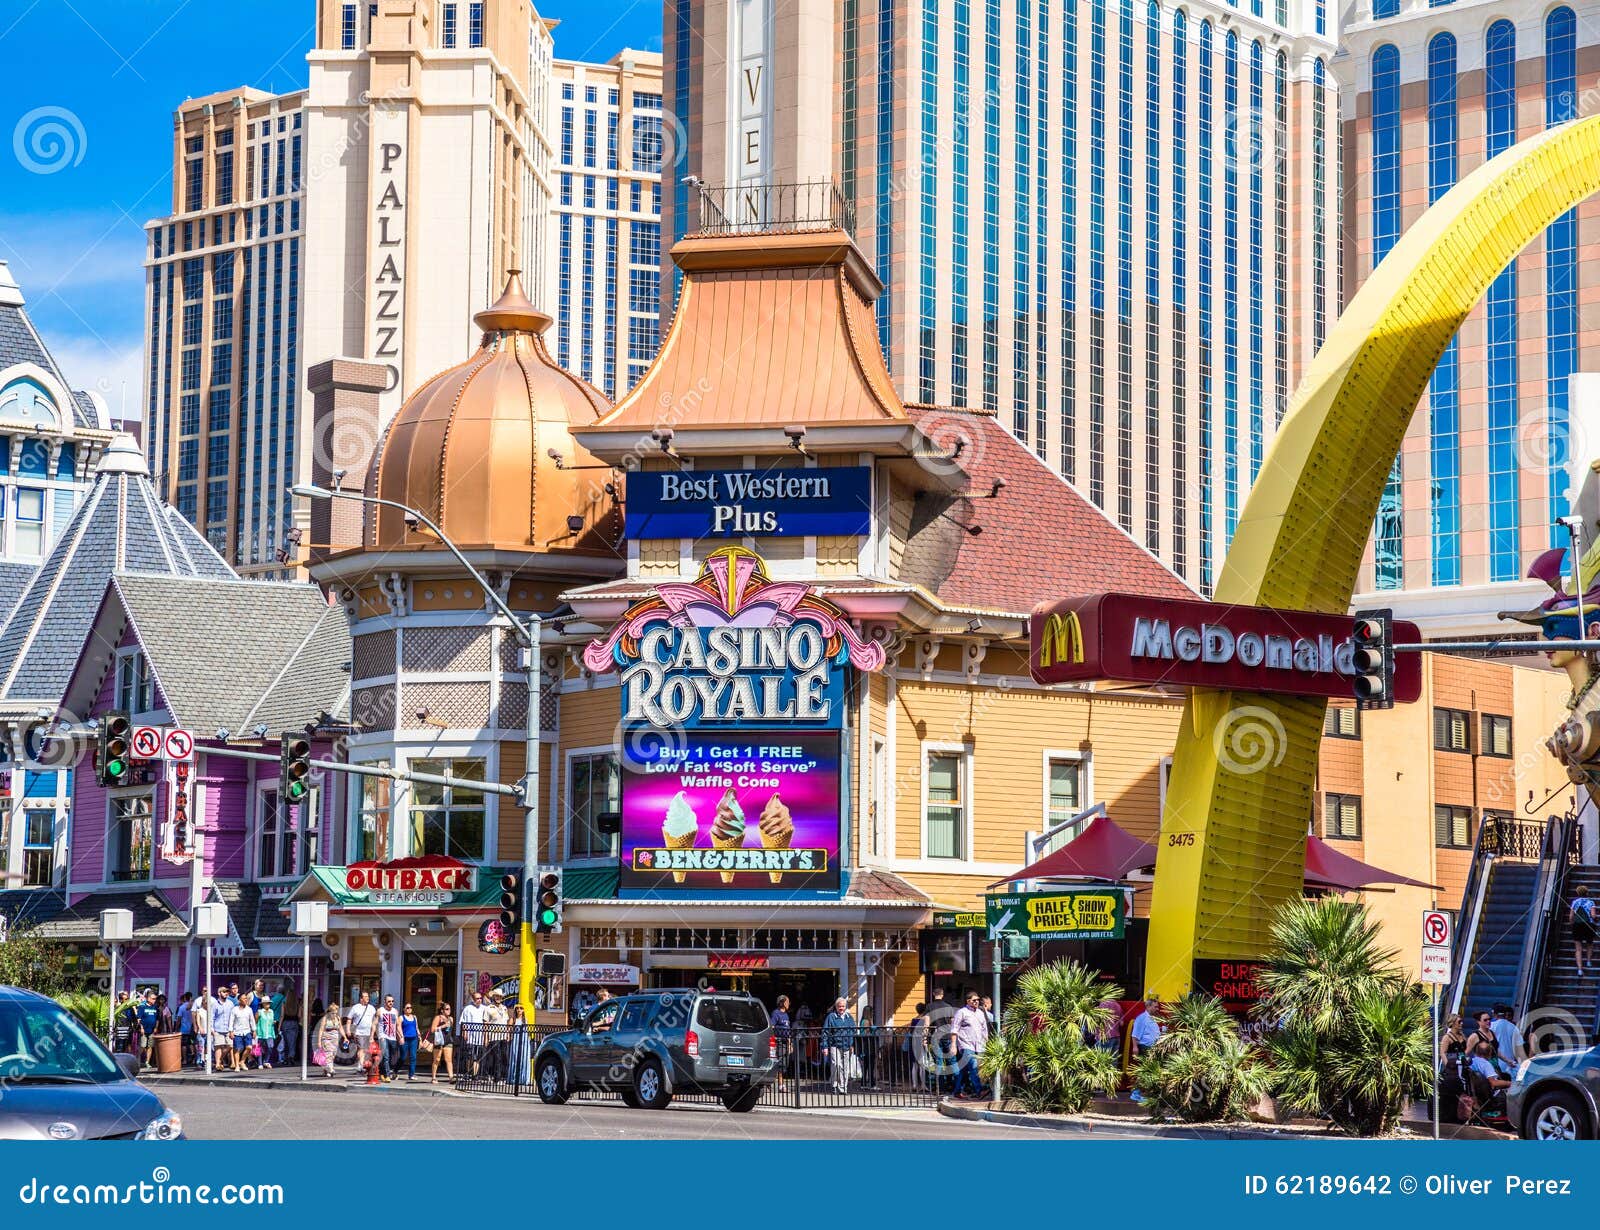 21 Effective Ways To Get More Out Of Vegas Plus Casino